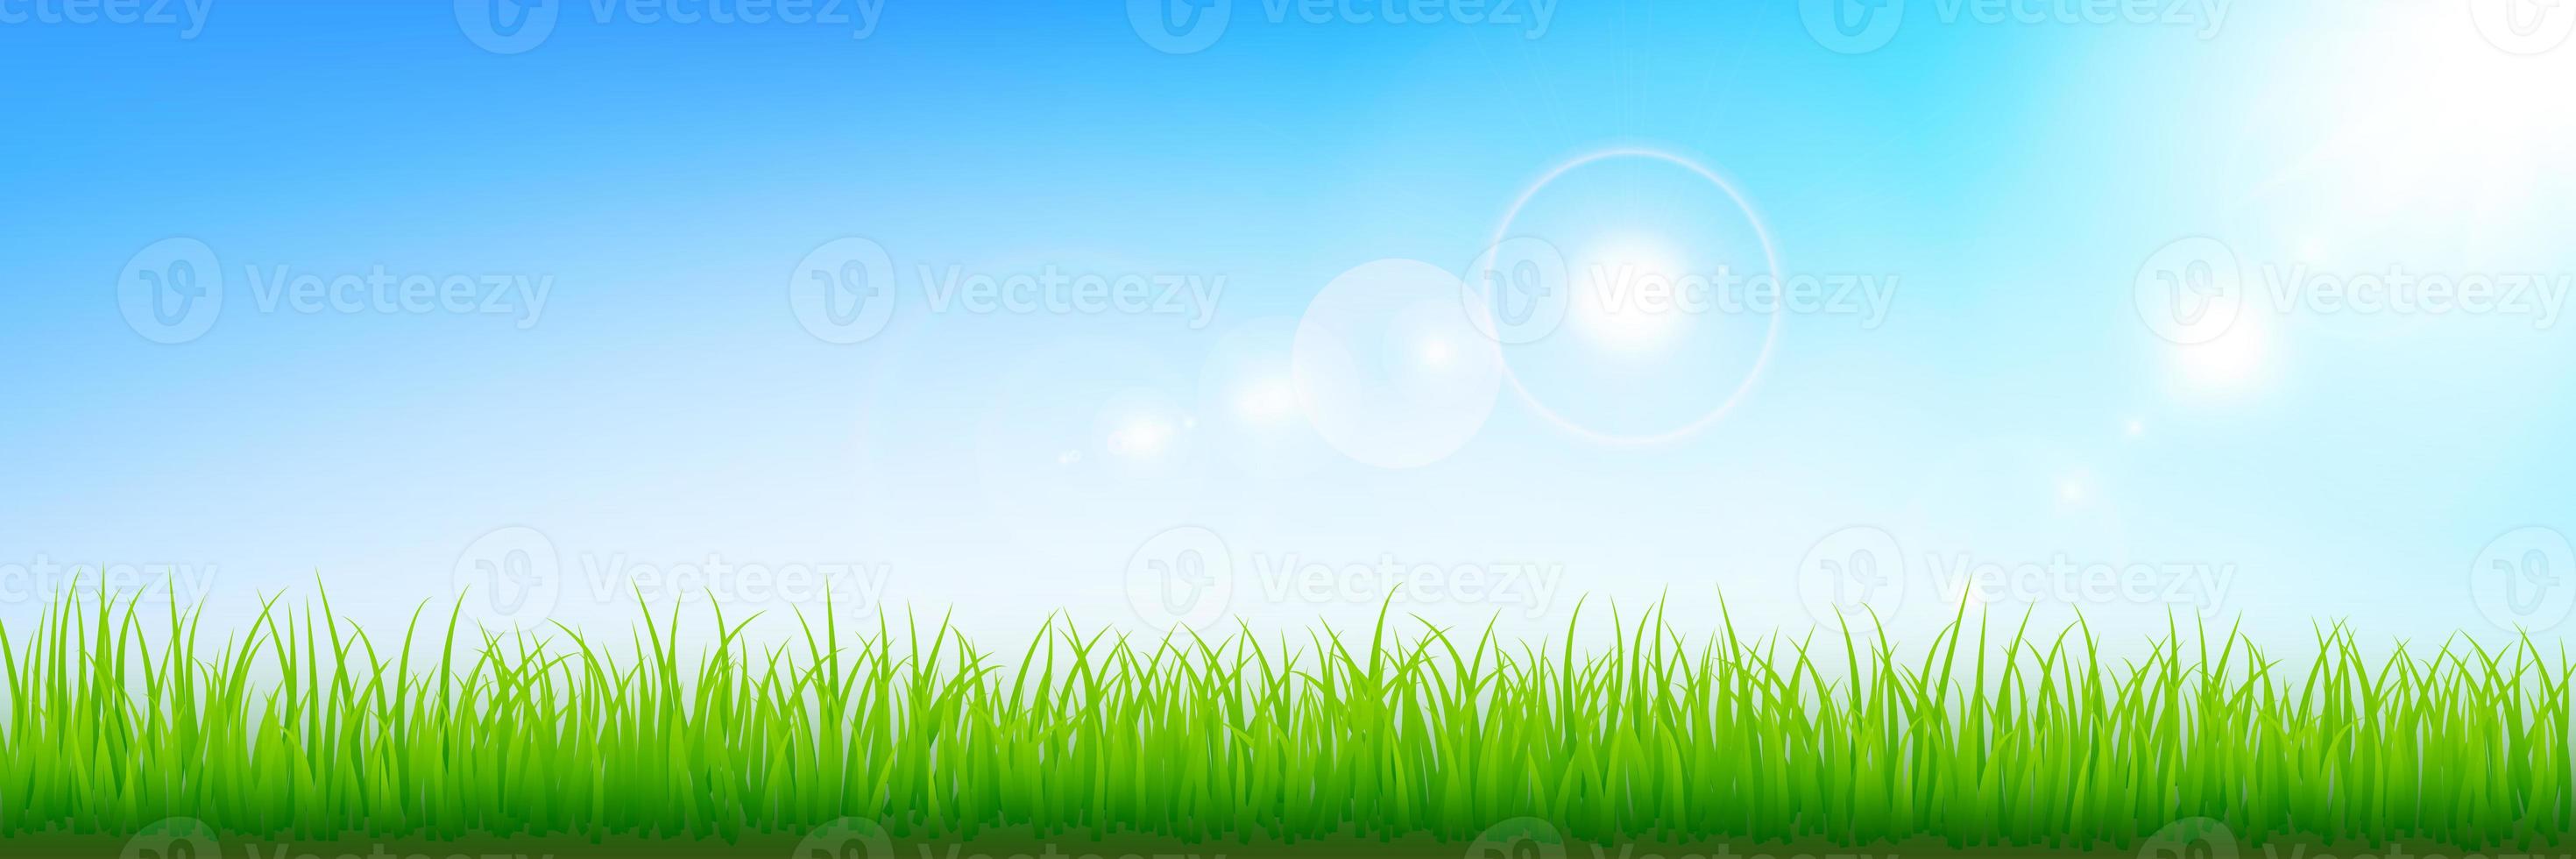 Illustrated background with grass border and sunlight against blue sky. Illustrate sky scene. photo